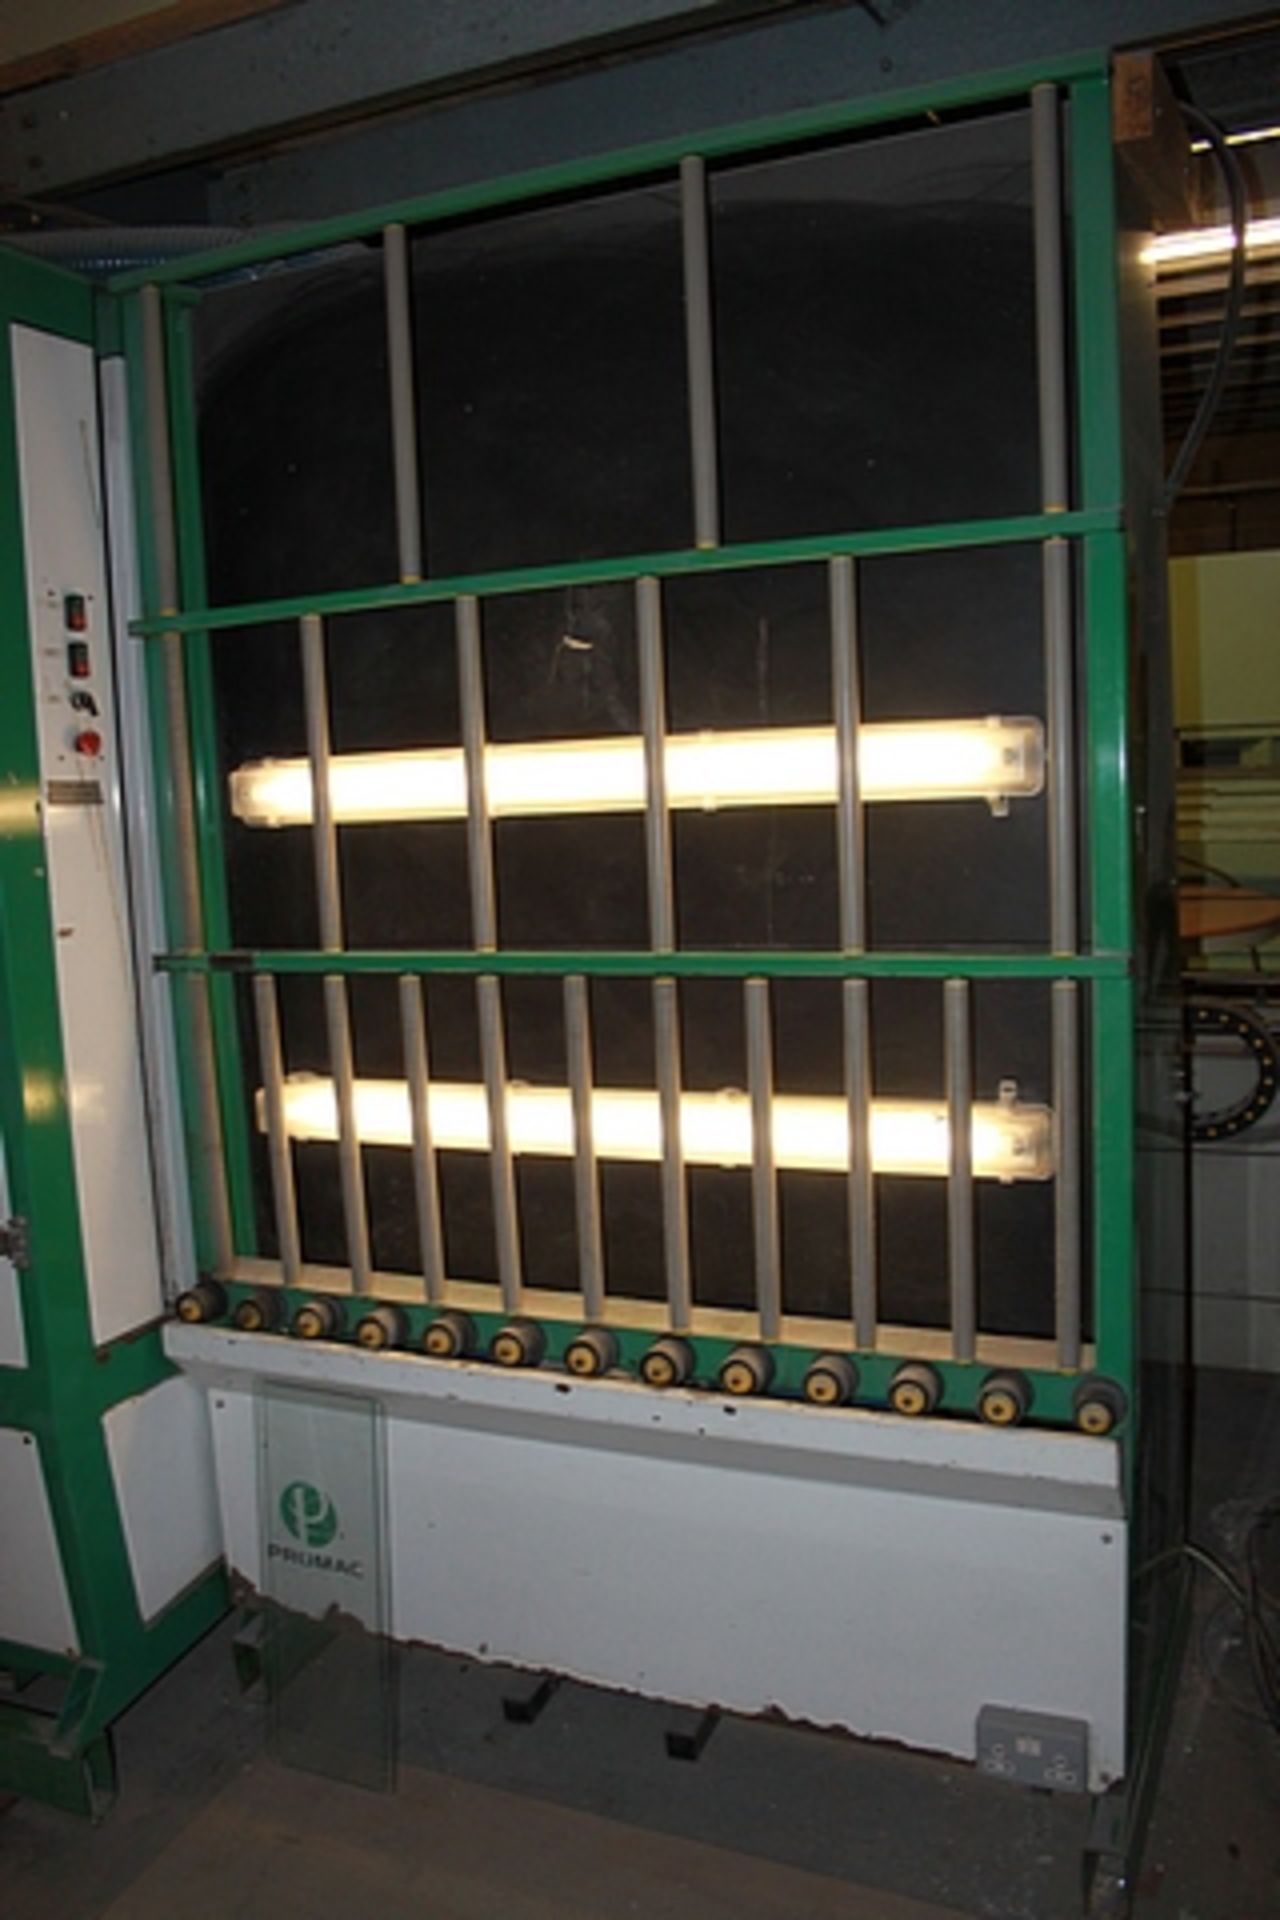 Promac vertical glass washer automatic machine for vertically washing and drying glass - Image 4 of 7